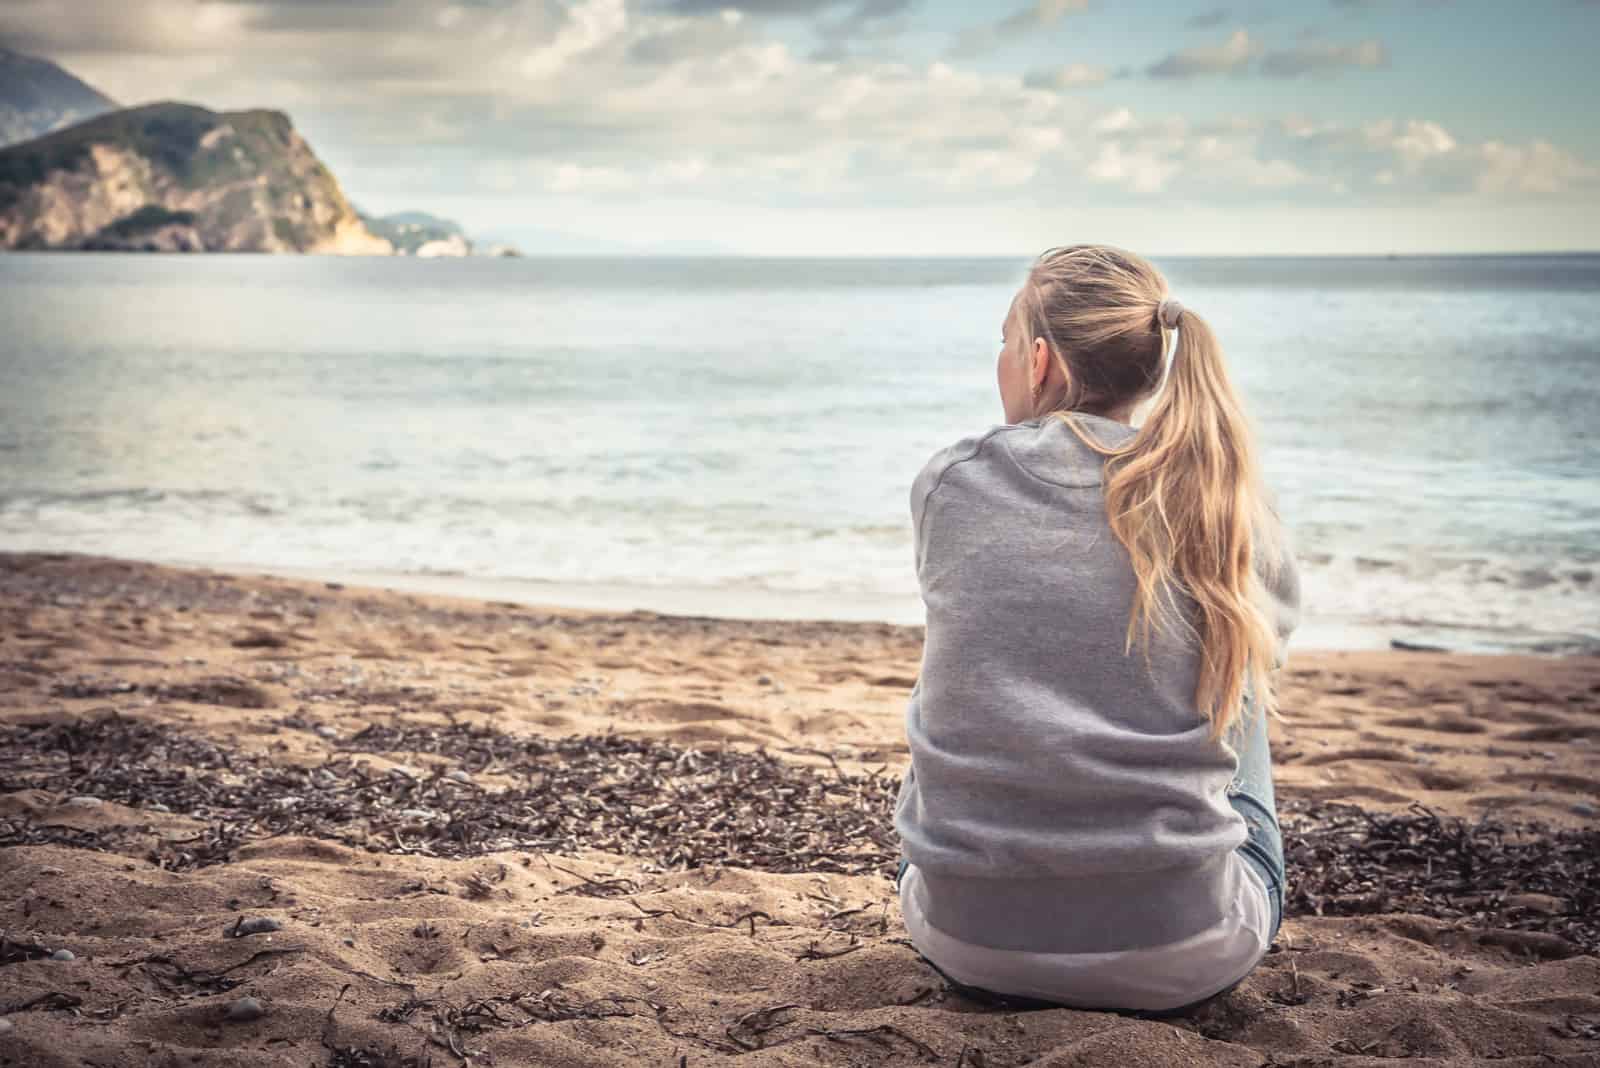 a woman with long blonde hair tied in a ponytail sits on the beach and looks out to sea